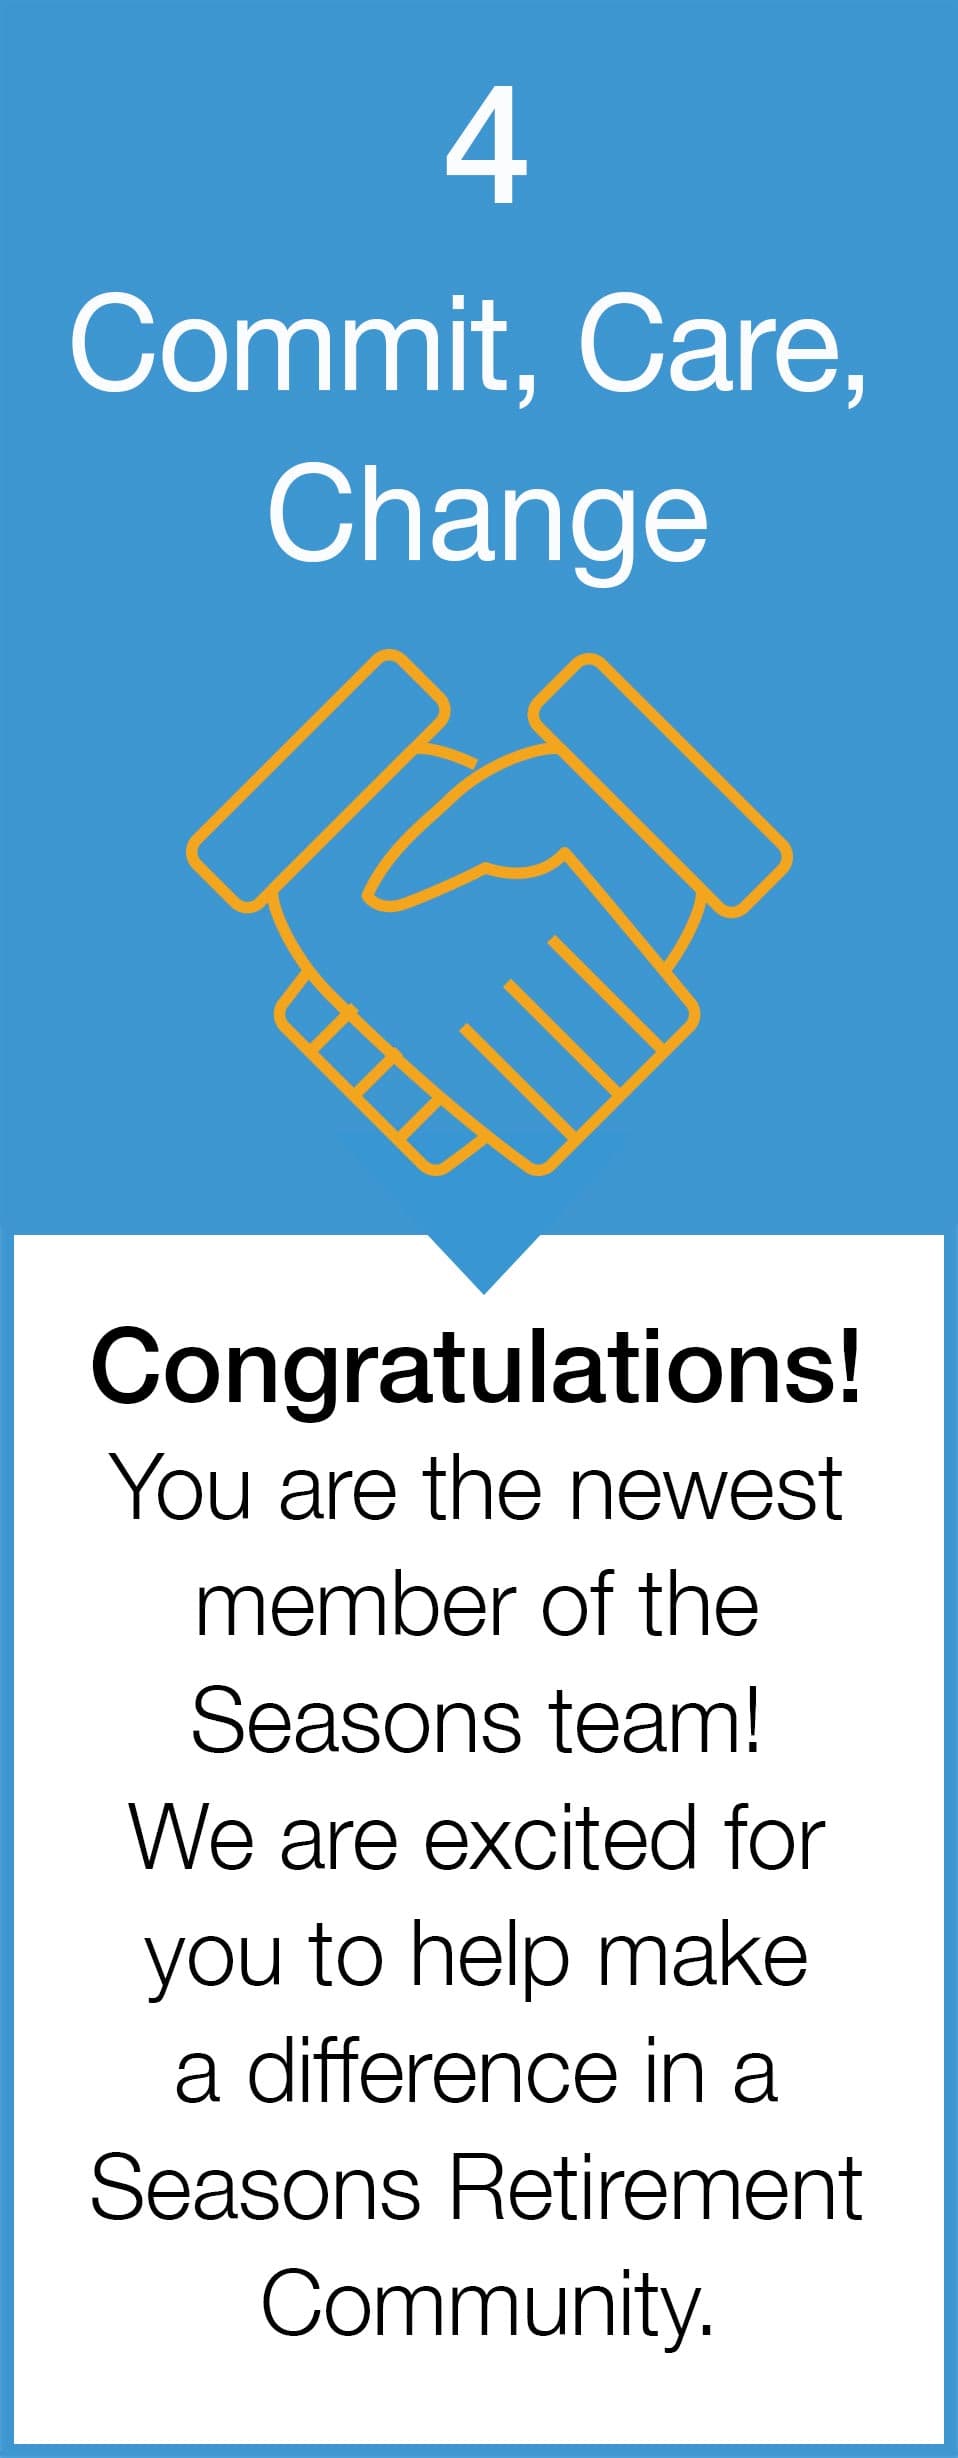 Step 4 Commit, Care, Change: Congratulations! You are the newest member of the Seasons team! We are excited for you to help make a difference in a Seasons Retirement Community.